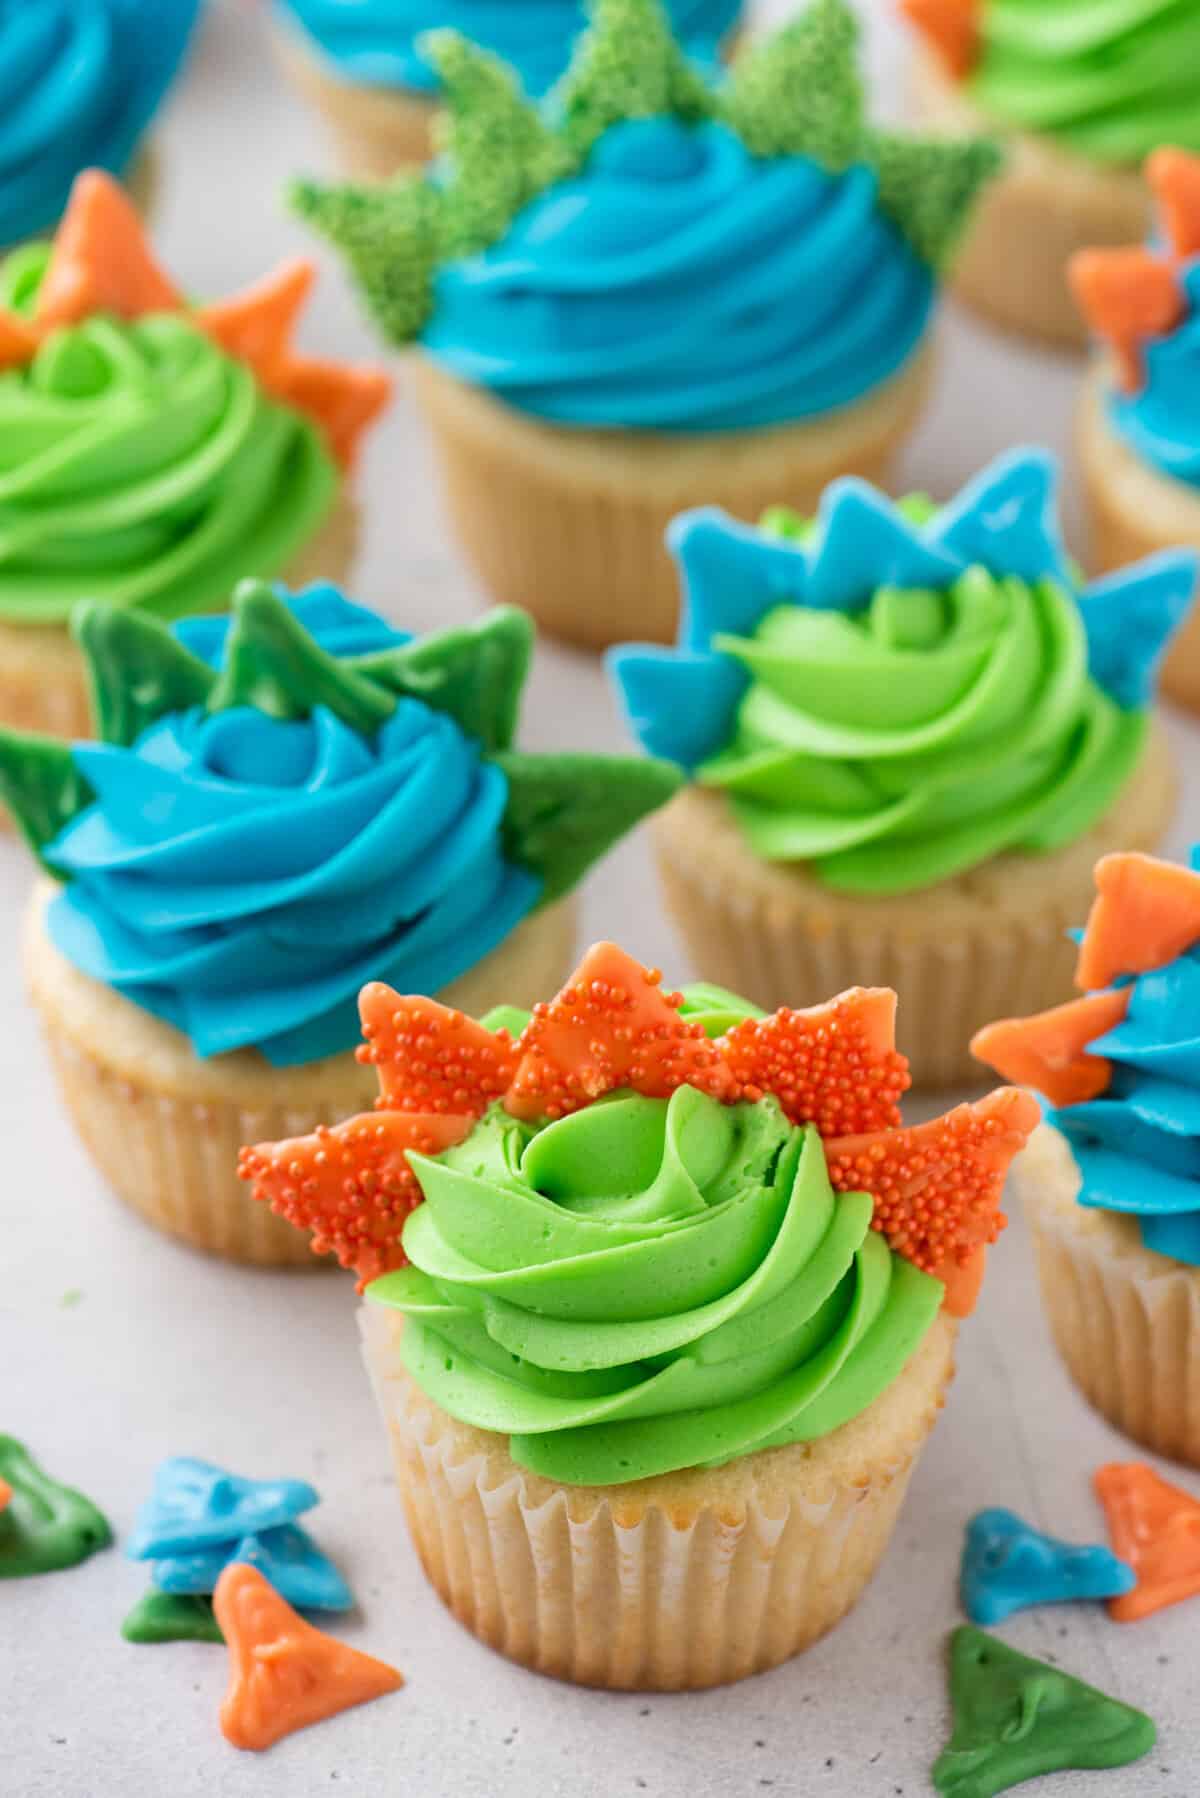 Dinosaur cupcakes topped with almond bark spikes